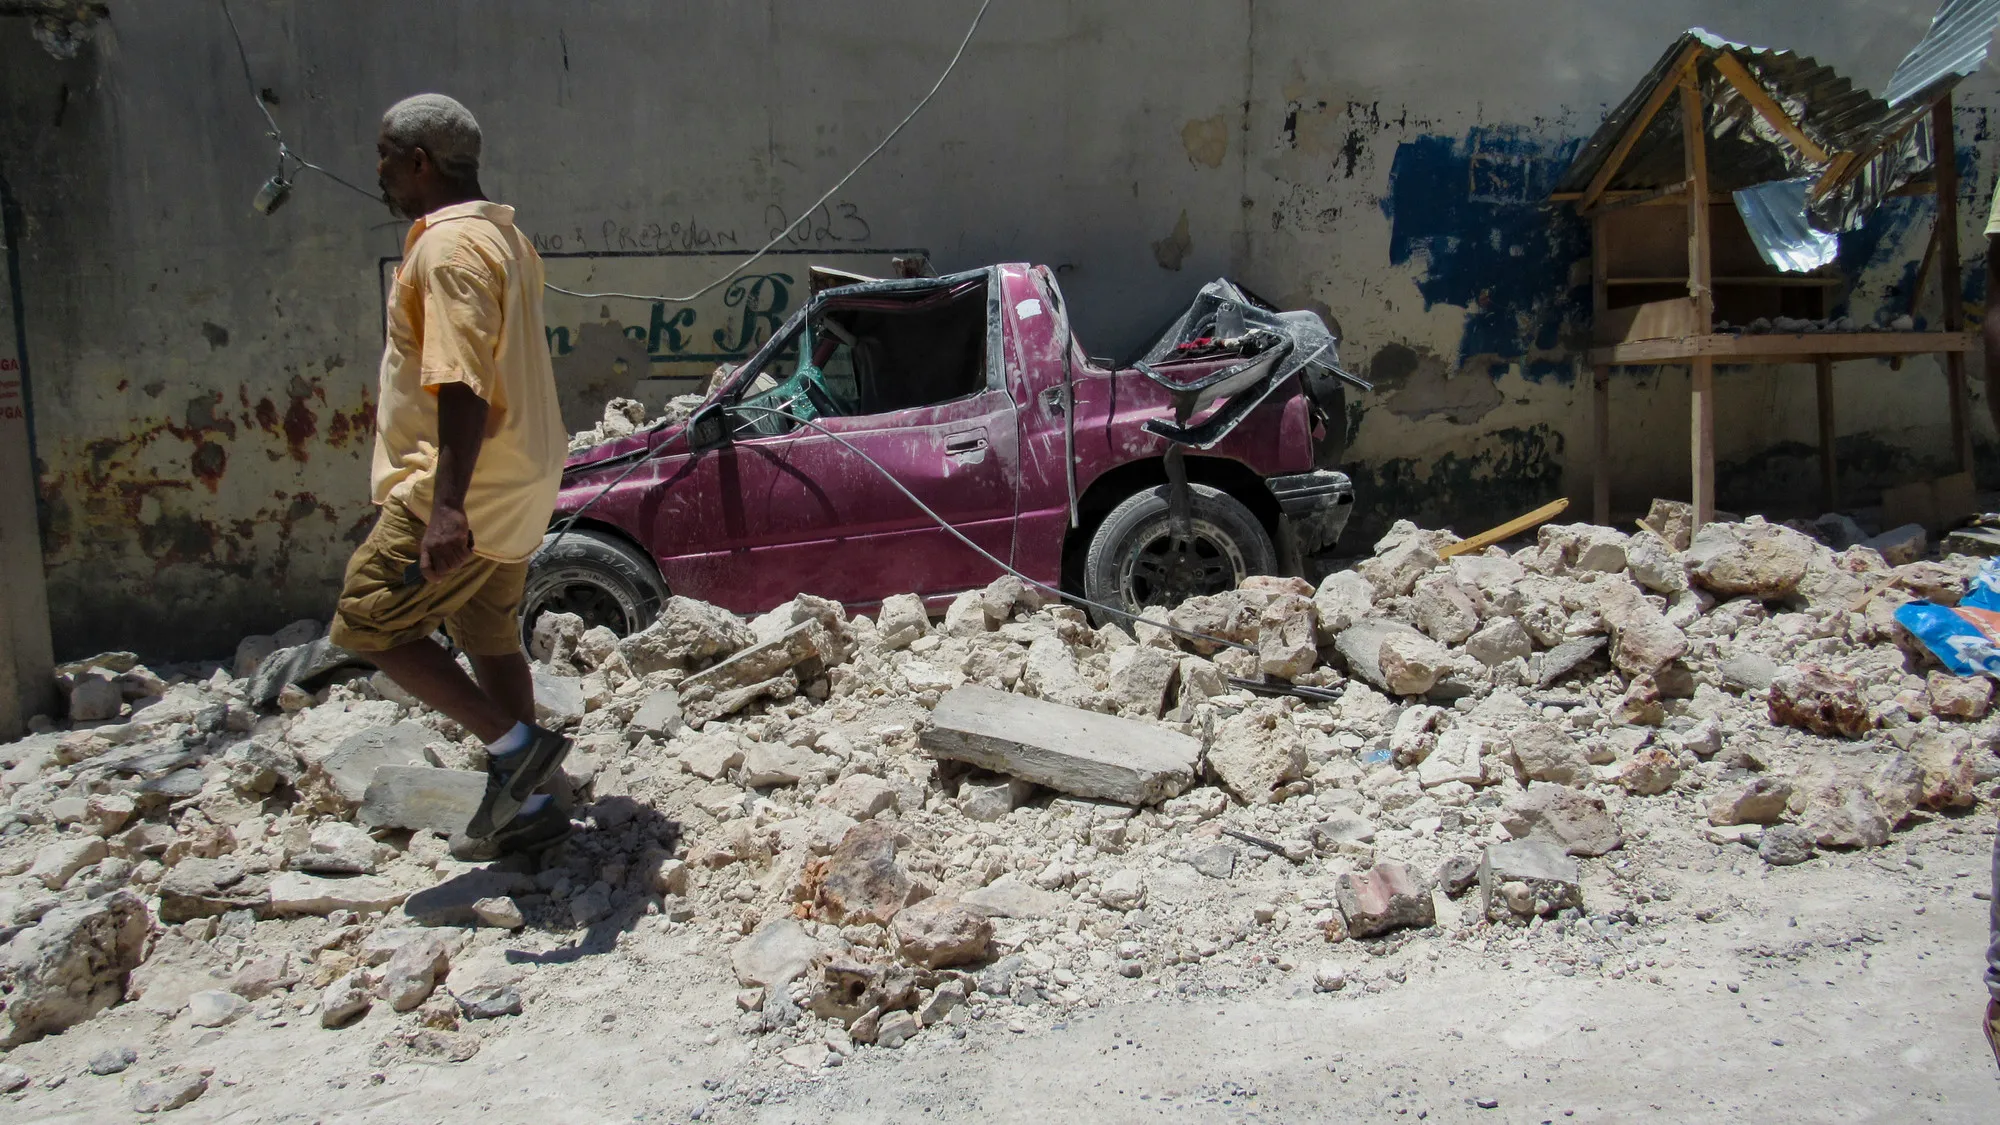 Footage of Port-au-Prince, Haiti following the 7.2 magnitude earthquake that struck on August 14, 2021.